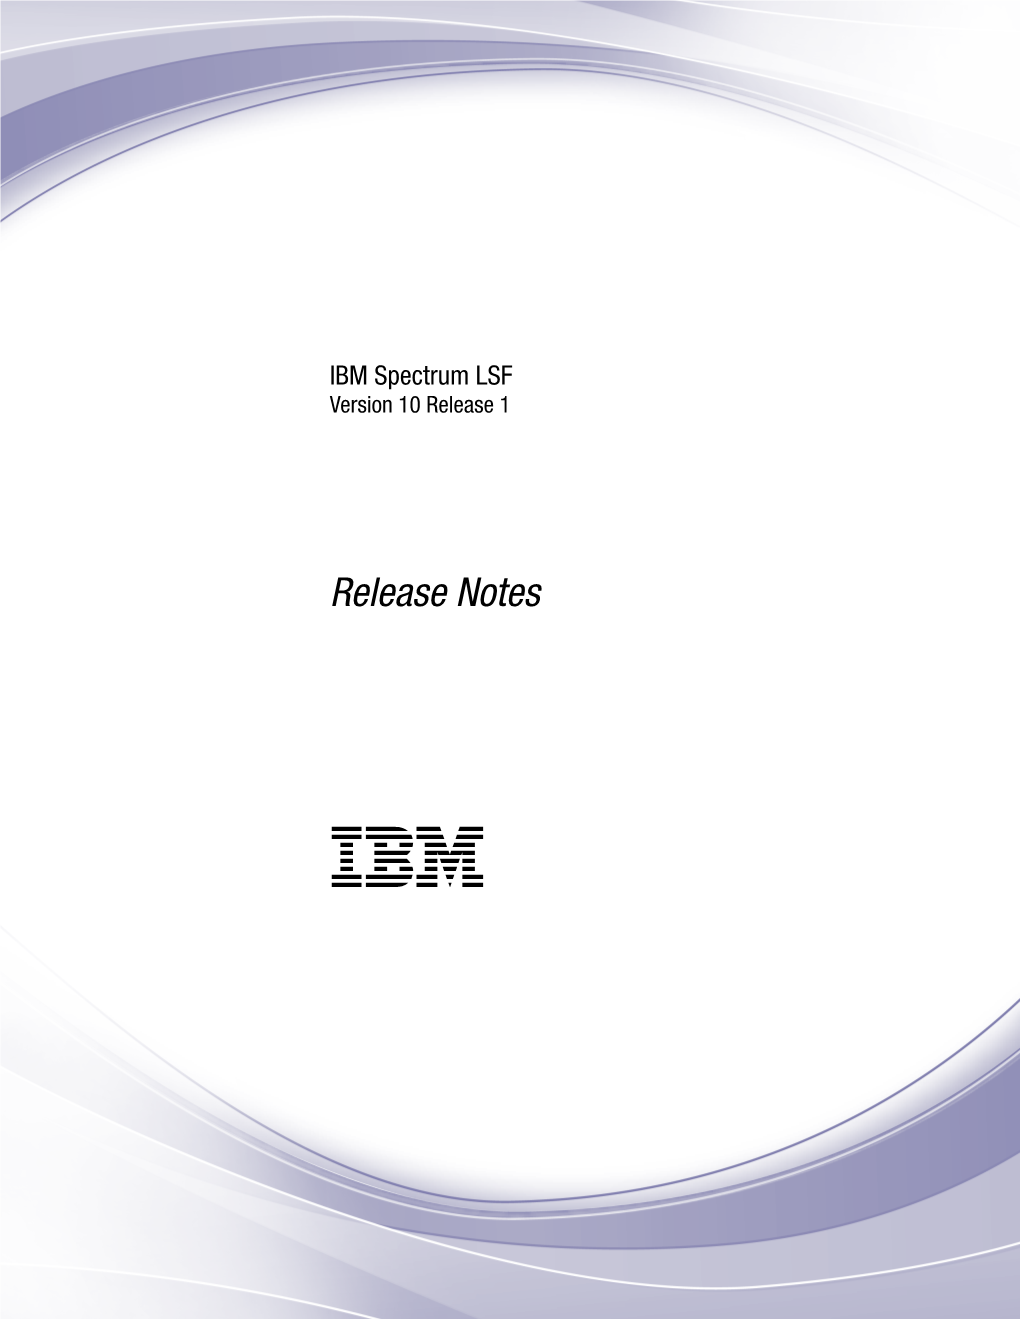 Release Notes for IBM Spectrum LSF Performance Enhancements